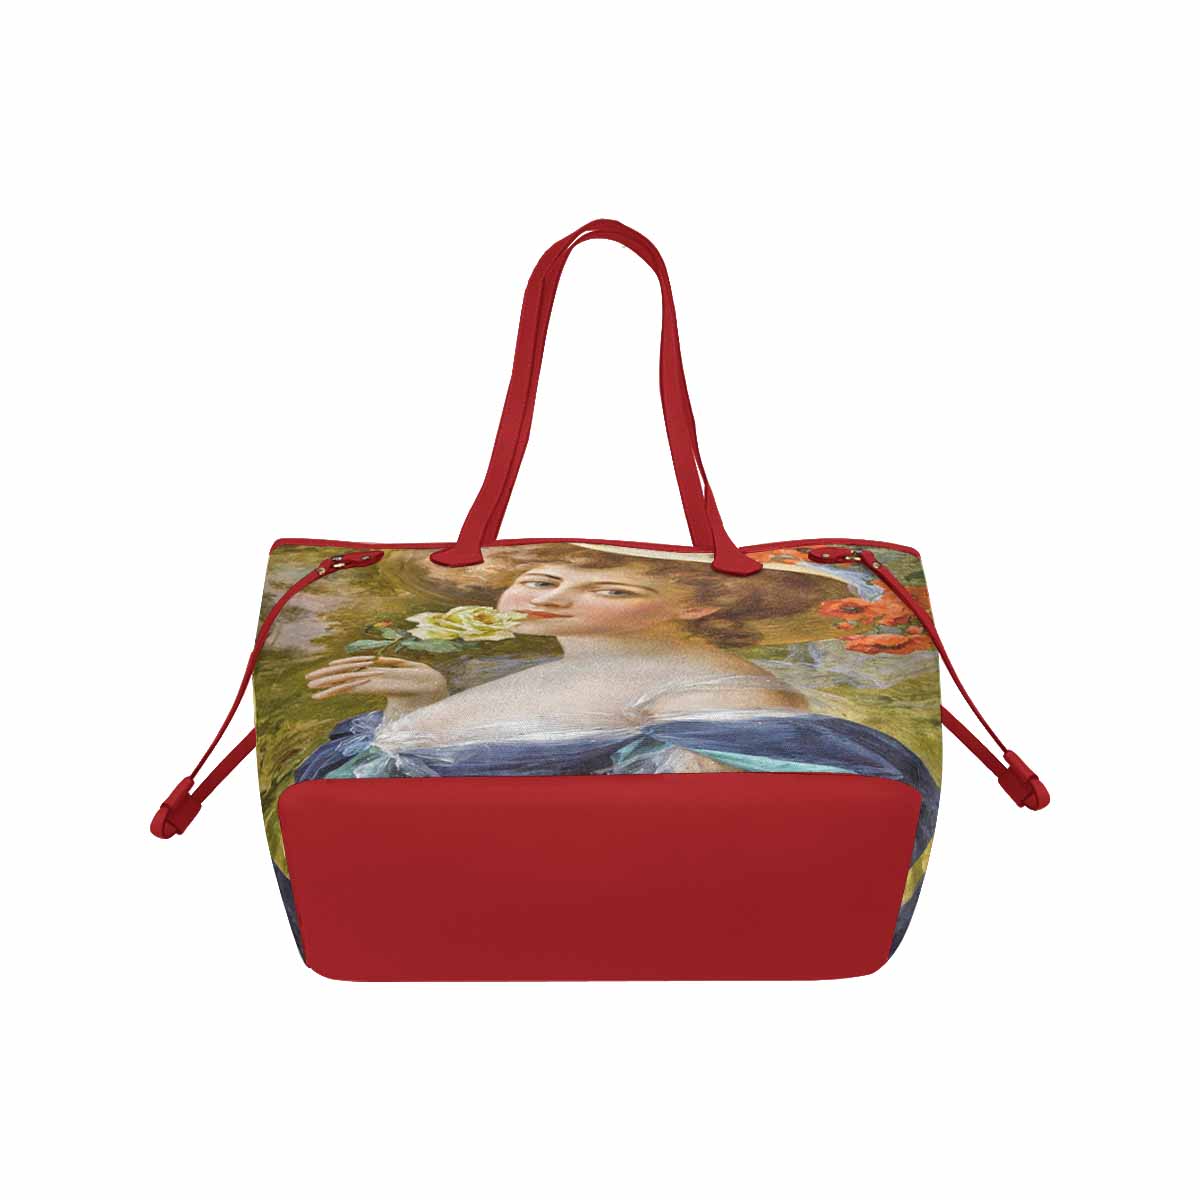 Victorian Lady Design Handbag, Model 1695361, Woman With Yellow Rose At Mouth, RED TRIM